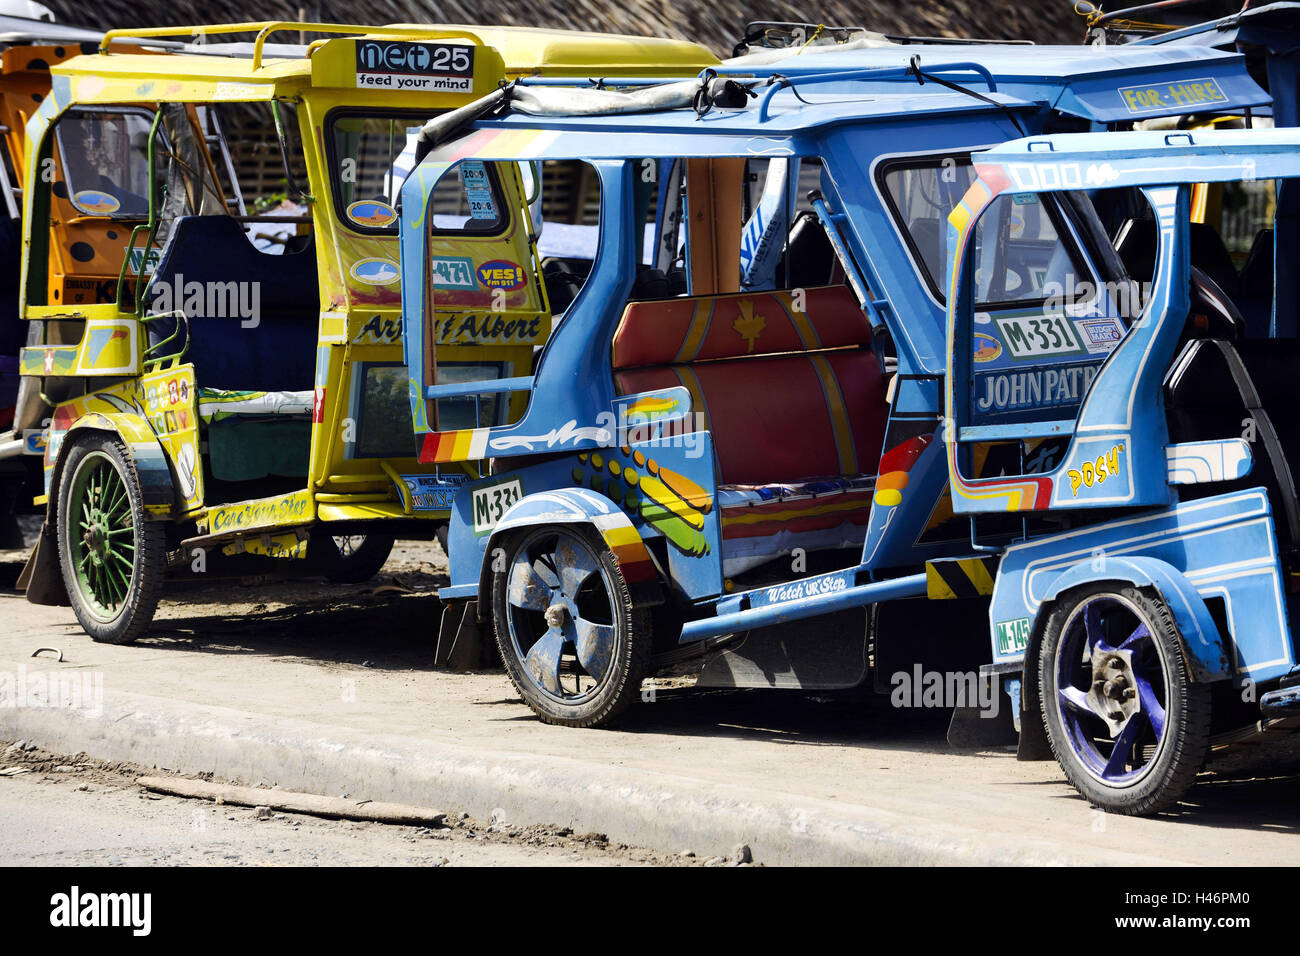 The Philippines, Boracay, sidecars, tricycle, vacation, travelling, holidays, technology, colourfully, taxi, vehicle, tradition, park, tourism, promotion, motorcycle, Stock Photo